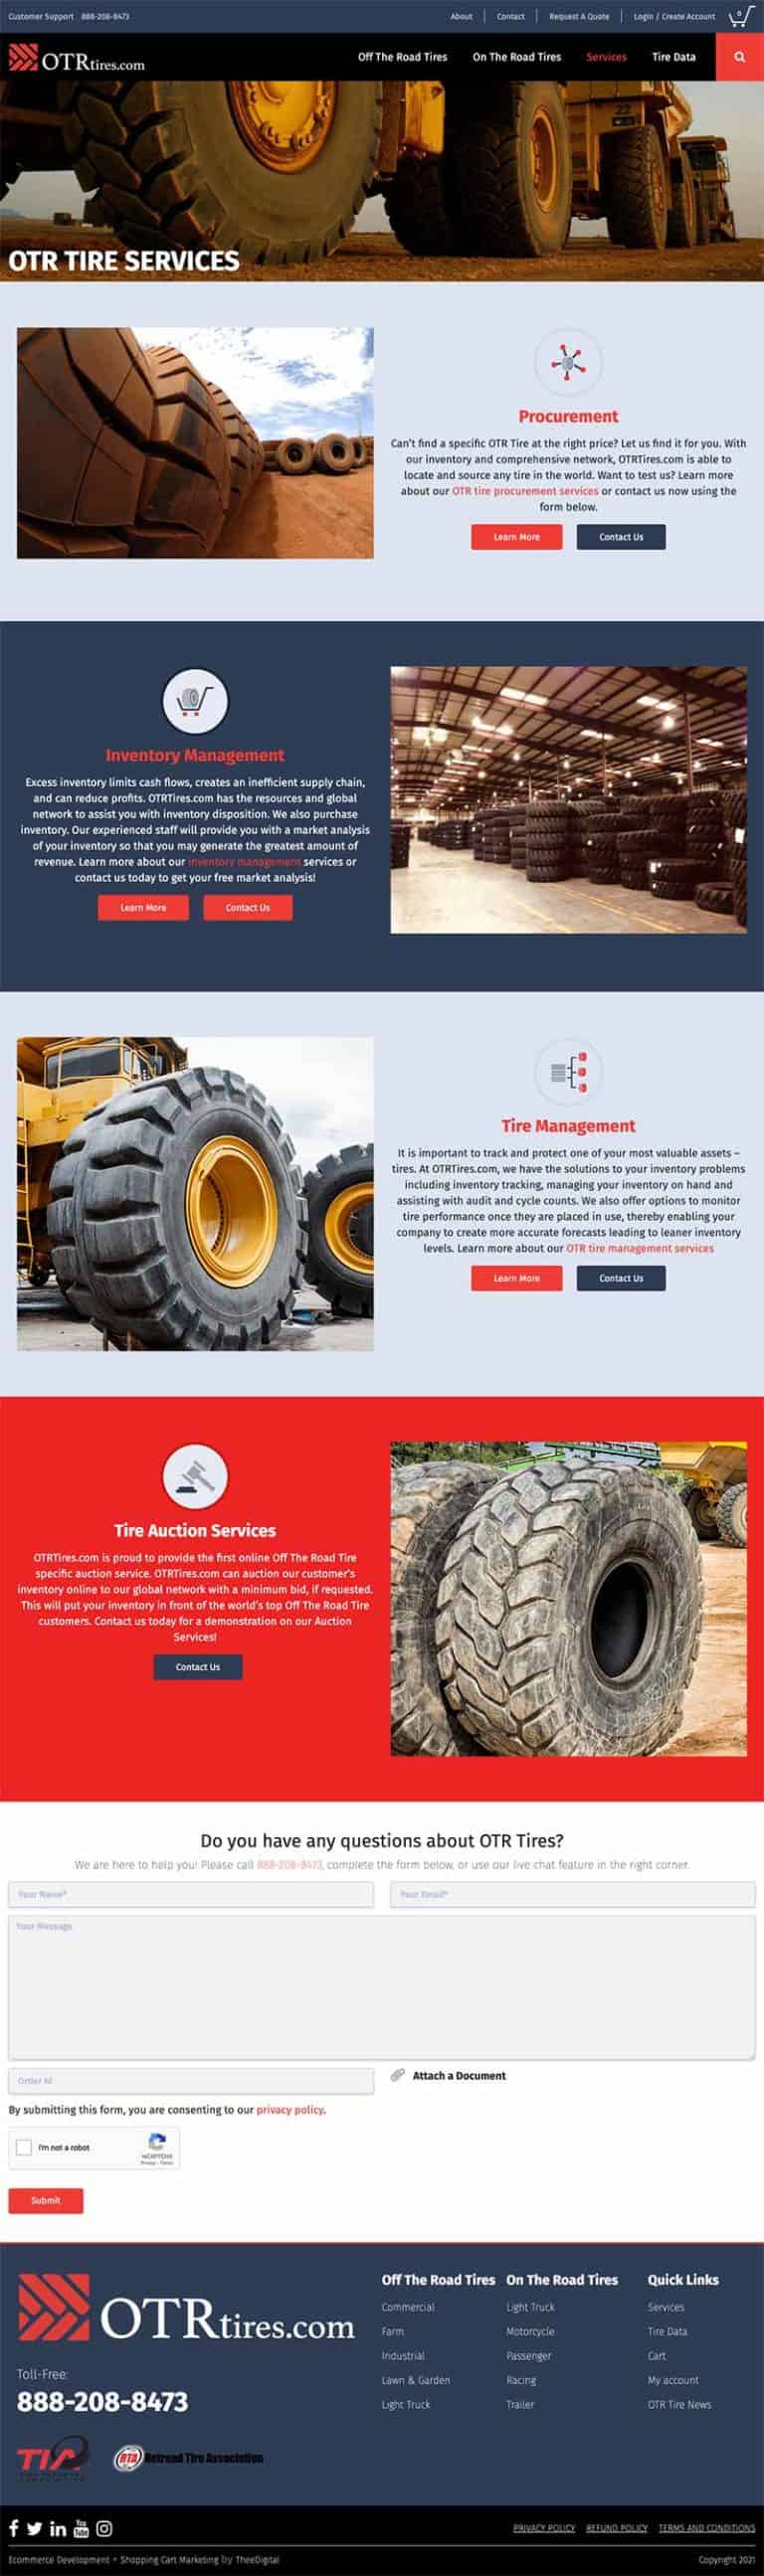 Services Page for Online Auto Parts Company